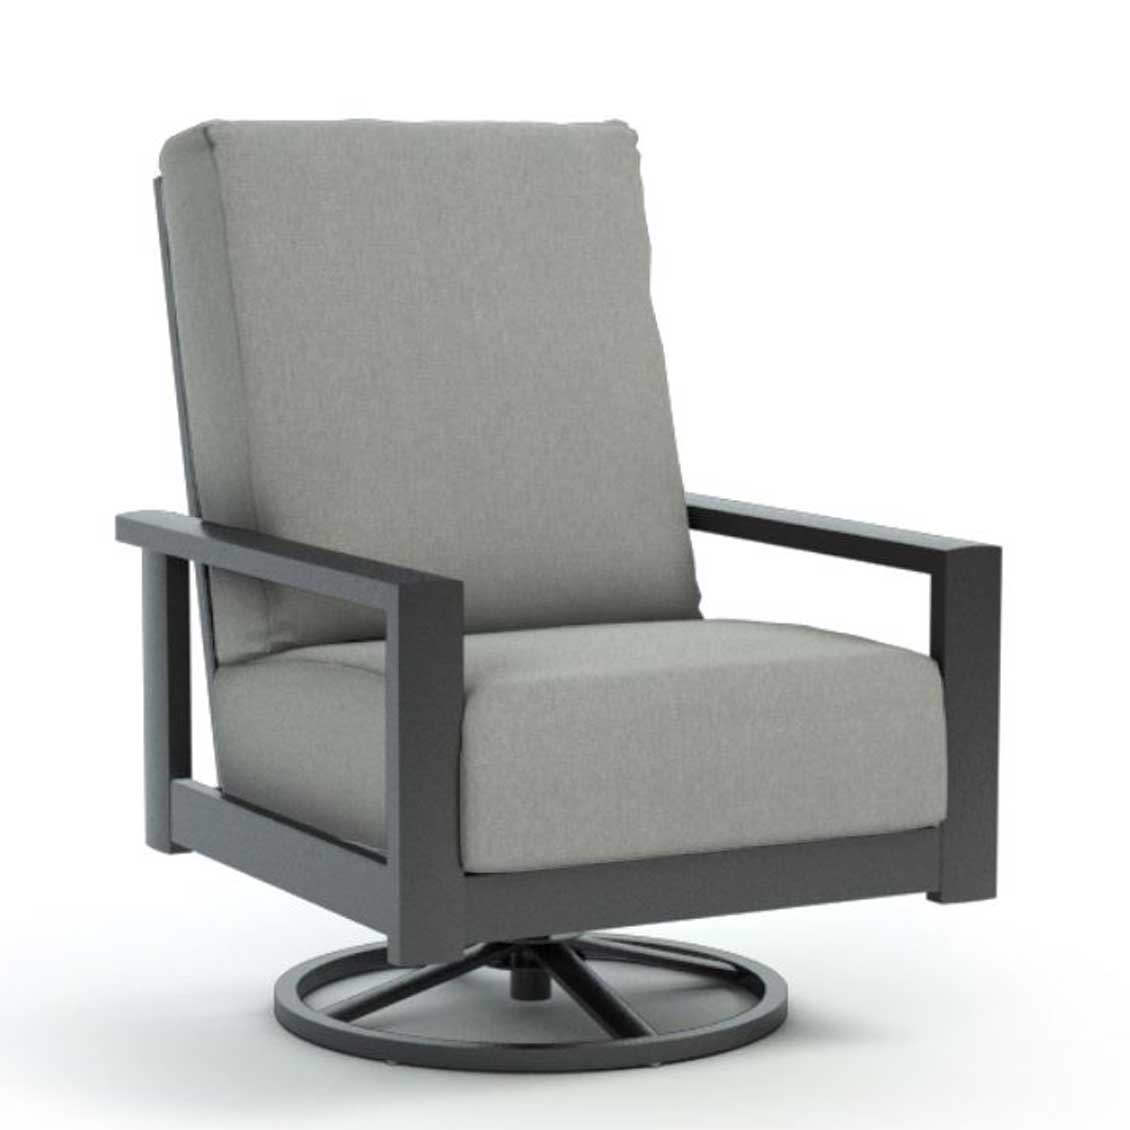 Elements Cushion Highback Swivel Chat Chair - Sand Silver